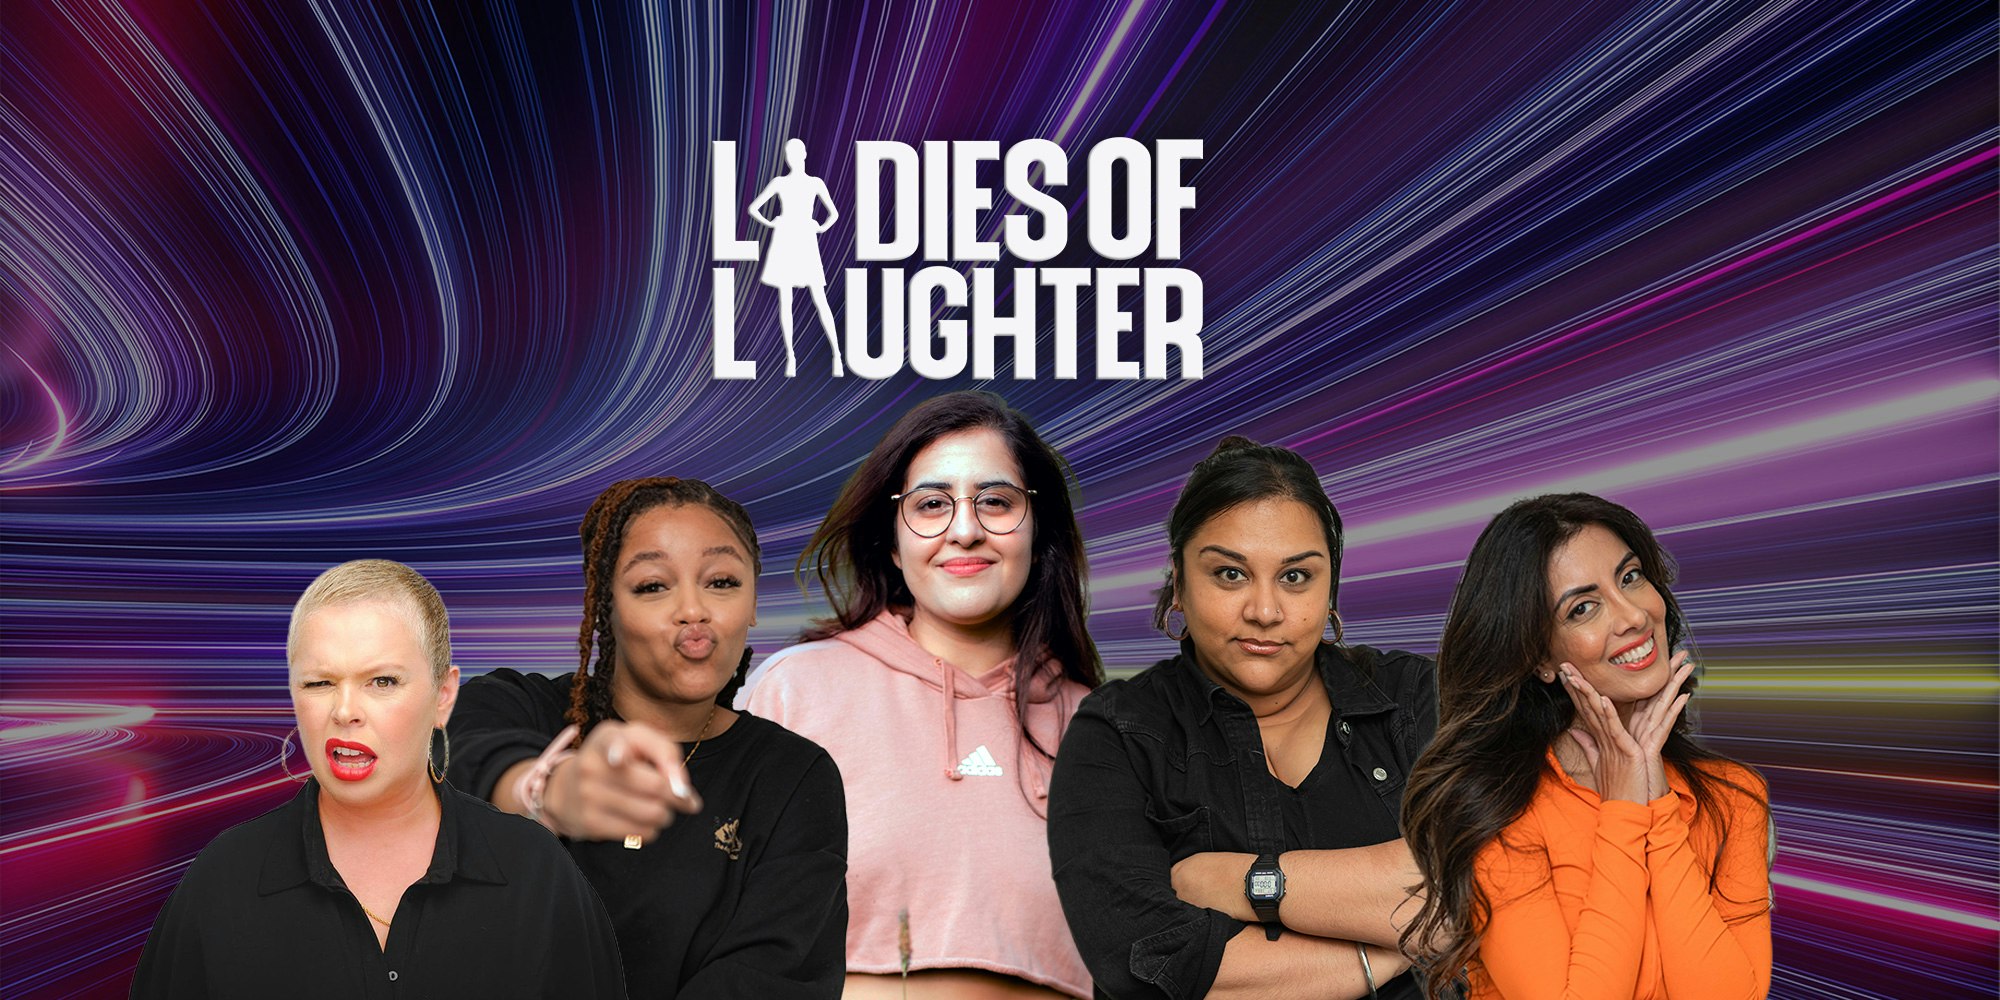 LOL : Ladies Of Laughter – Ilford ** SOLD OUT – Join Waiting List Or Call Box Office 020 8708 8800 *